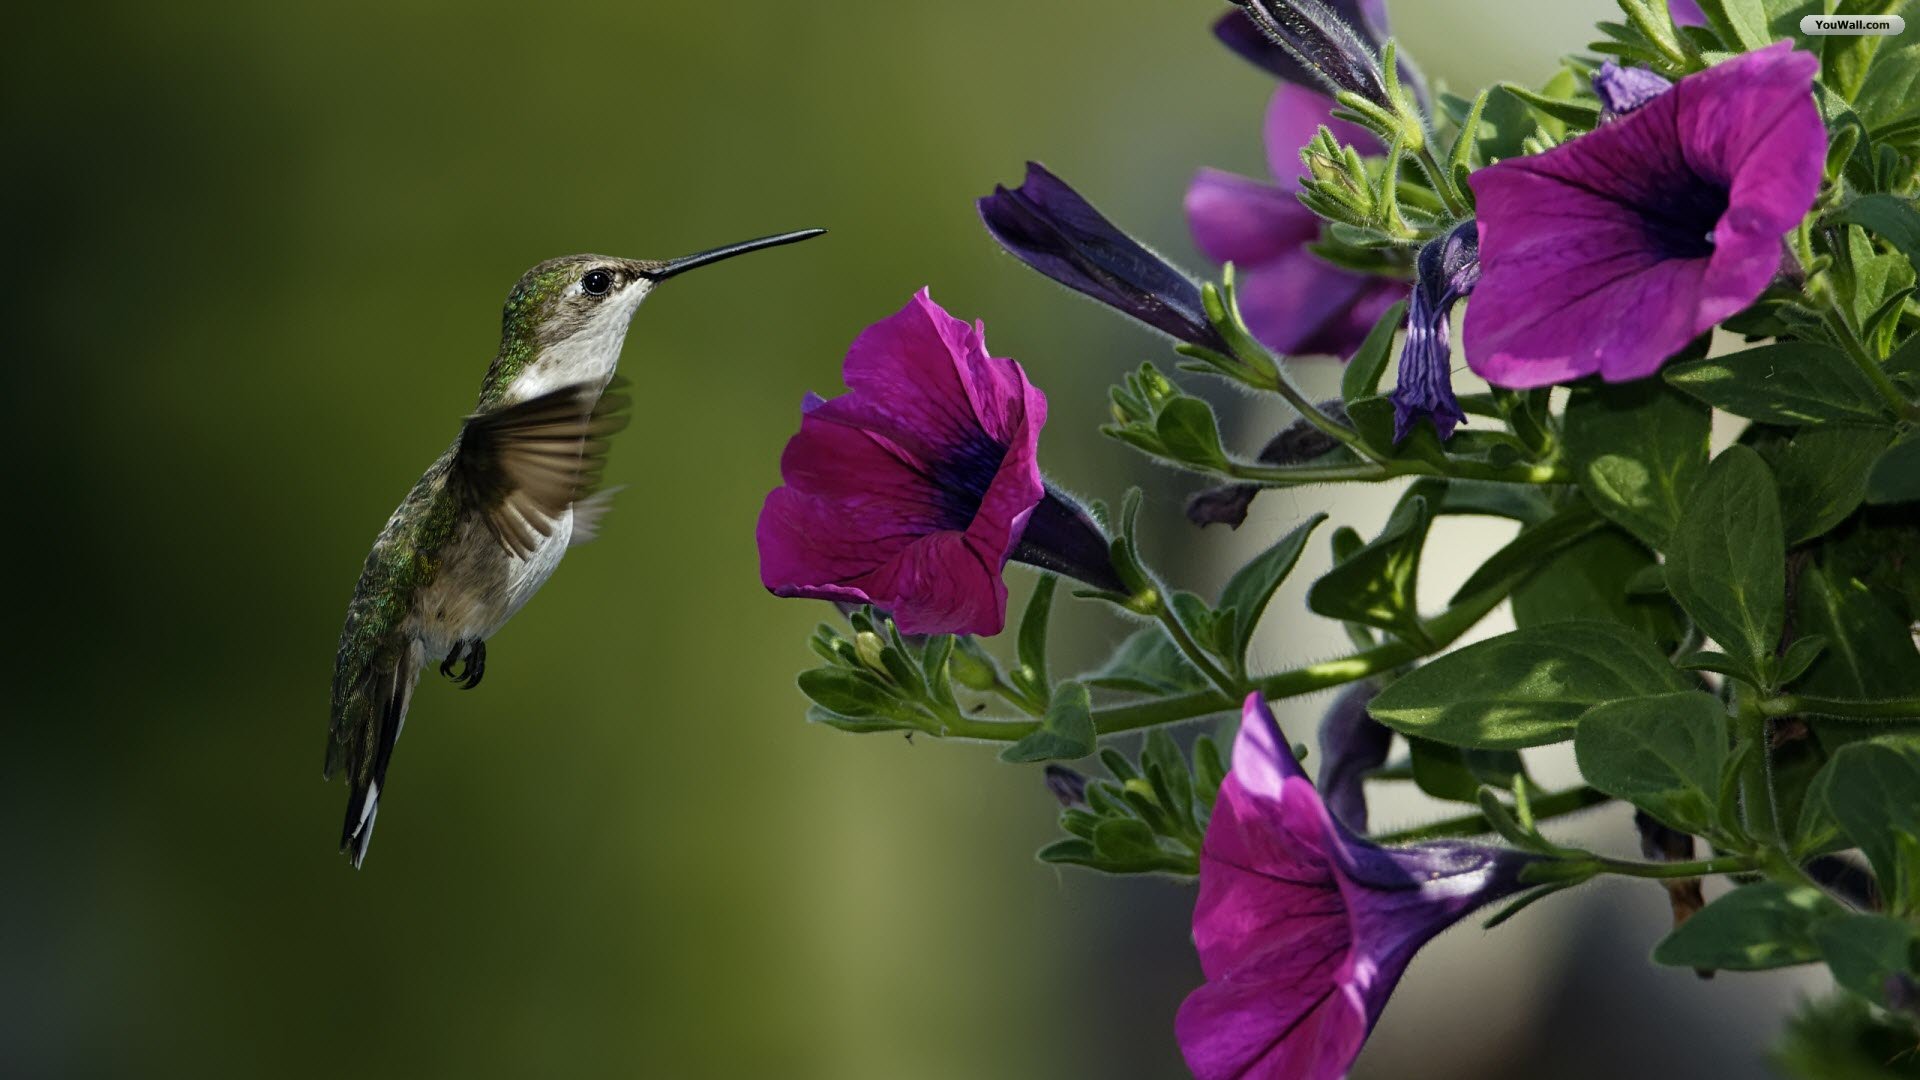  Images Birds Flowers Wallpaper 1920x1080 Full HD Wallpapers 1920x1080